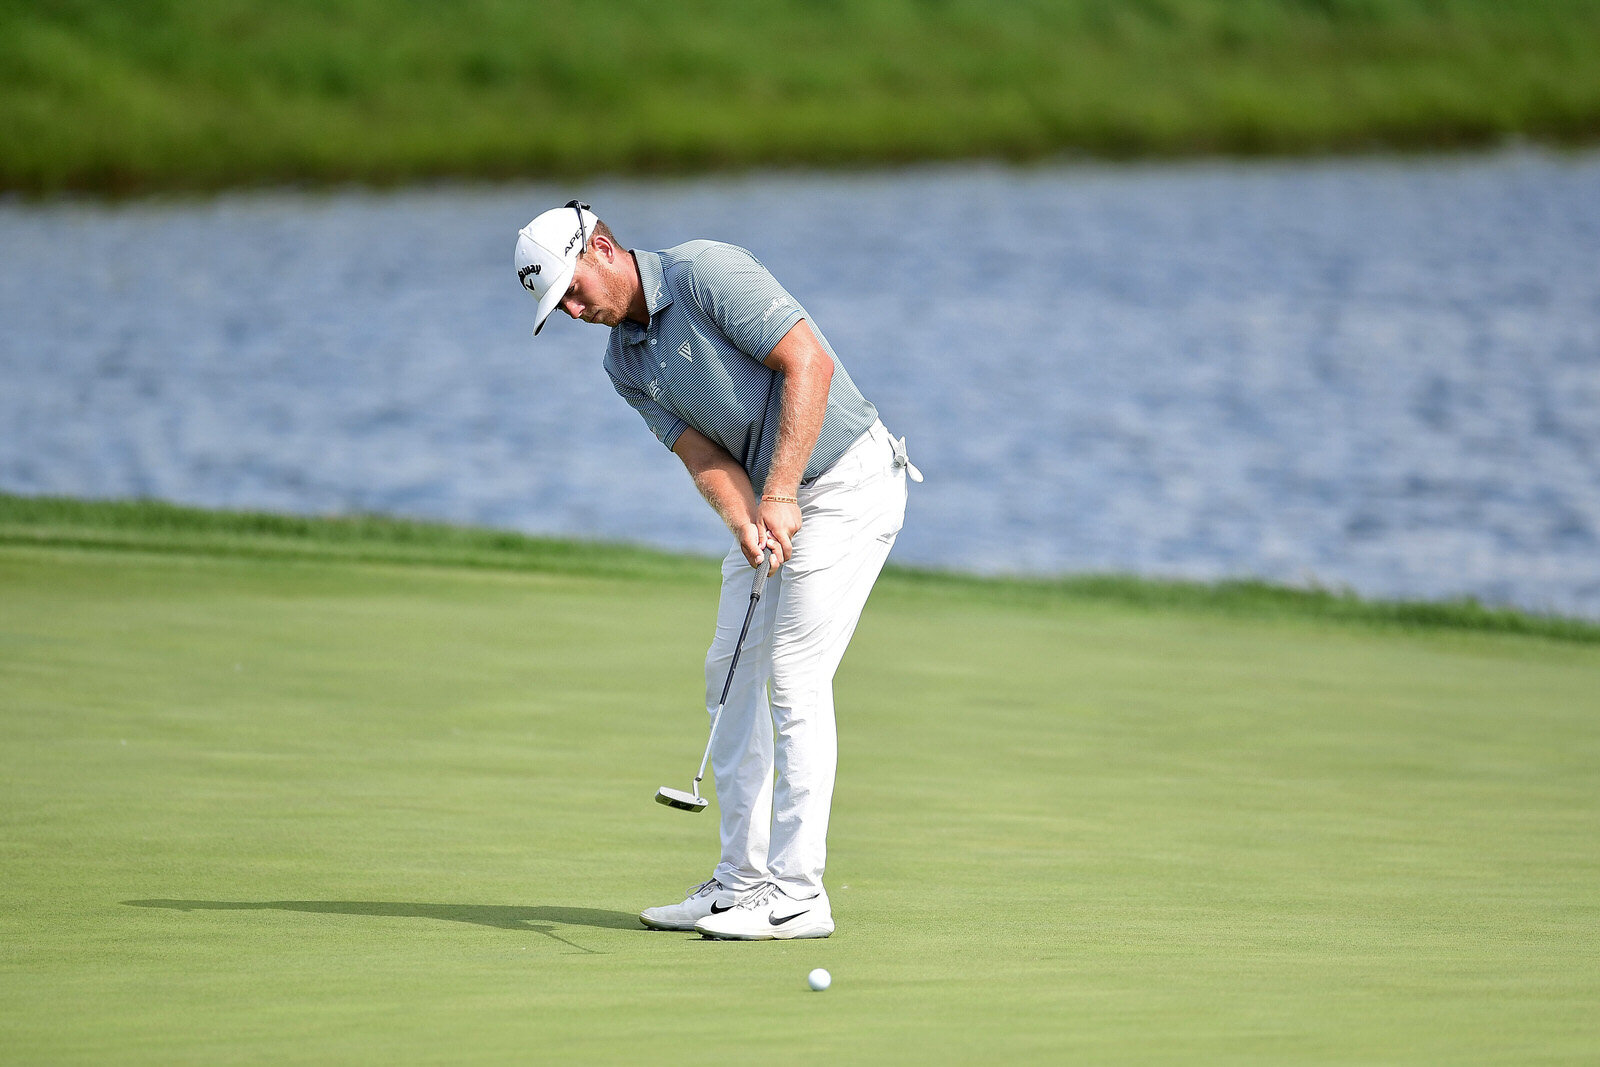  BLAINE, MINNESOTA - JULY 24: Talor Gooch of the United States putts on the 18th green during the second round of the 3M Open on July 24, 2020 at TPC Twin Cities in Blaine, Minnesota. (Photo by Stacy Revere/Getty Images) 